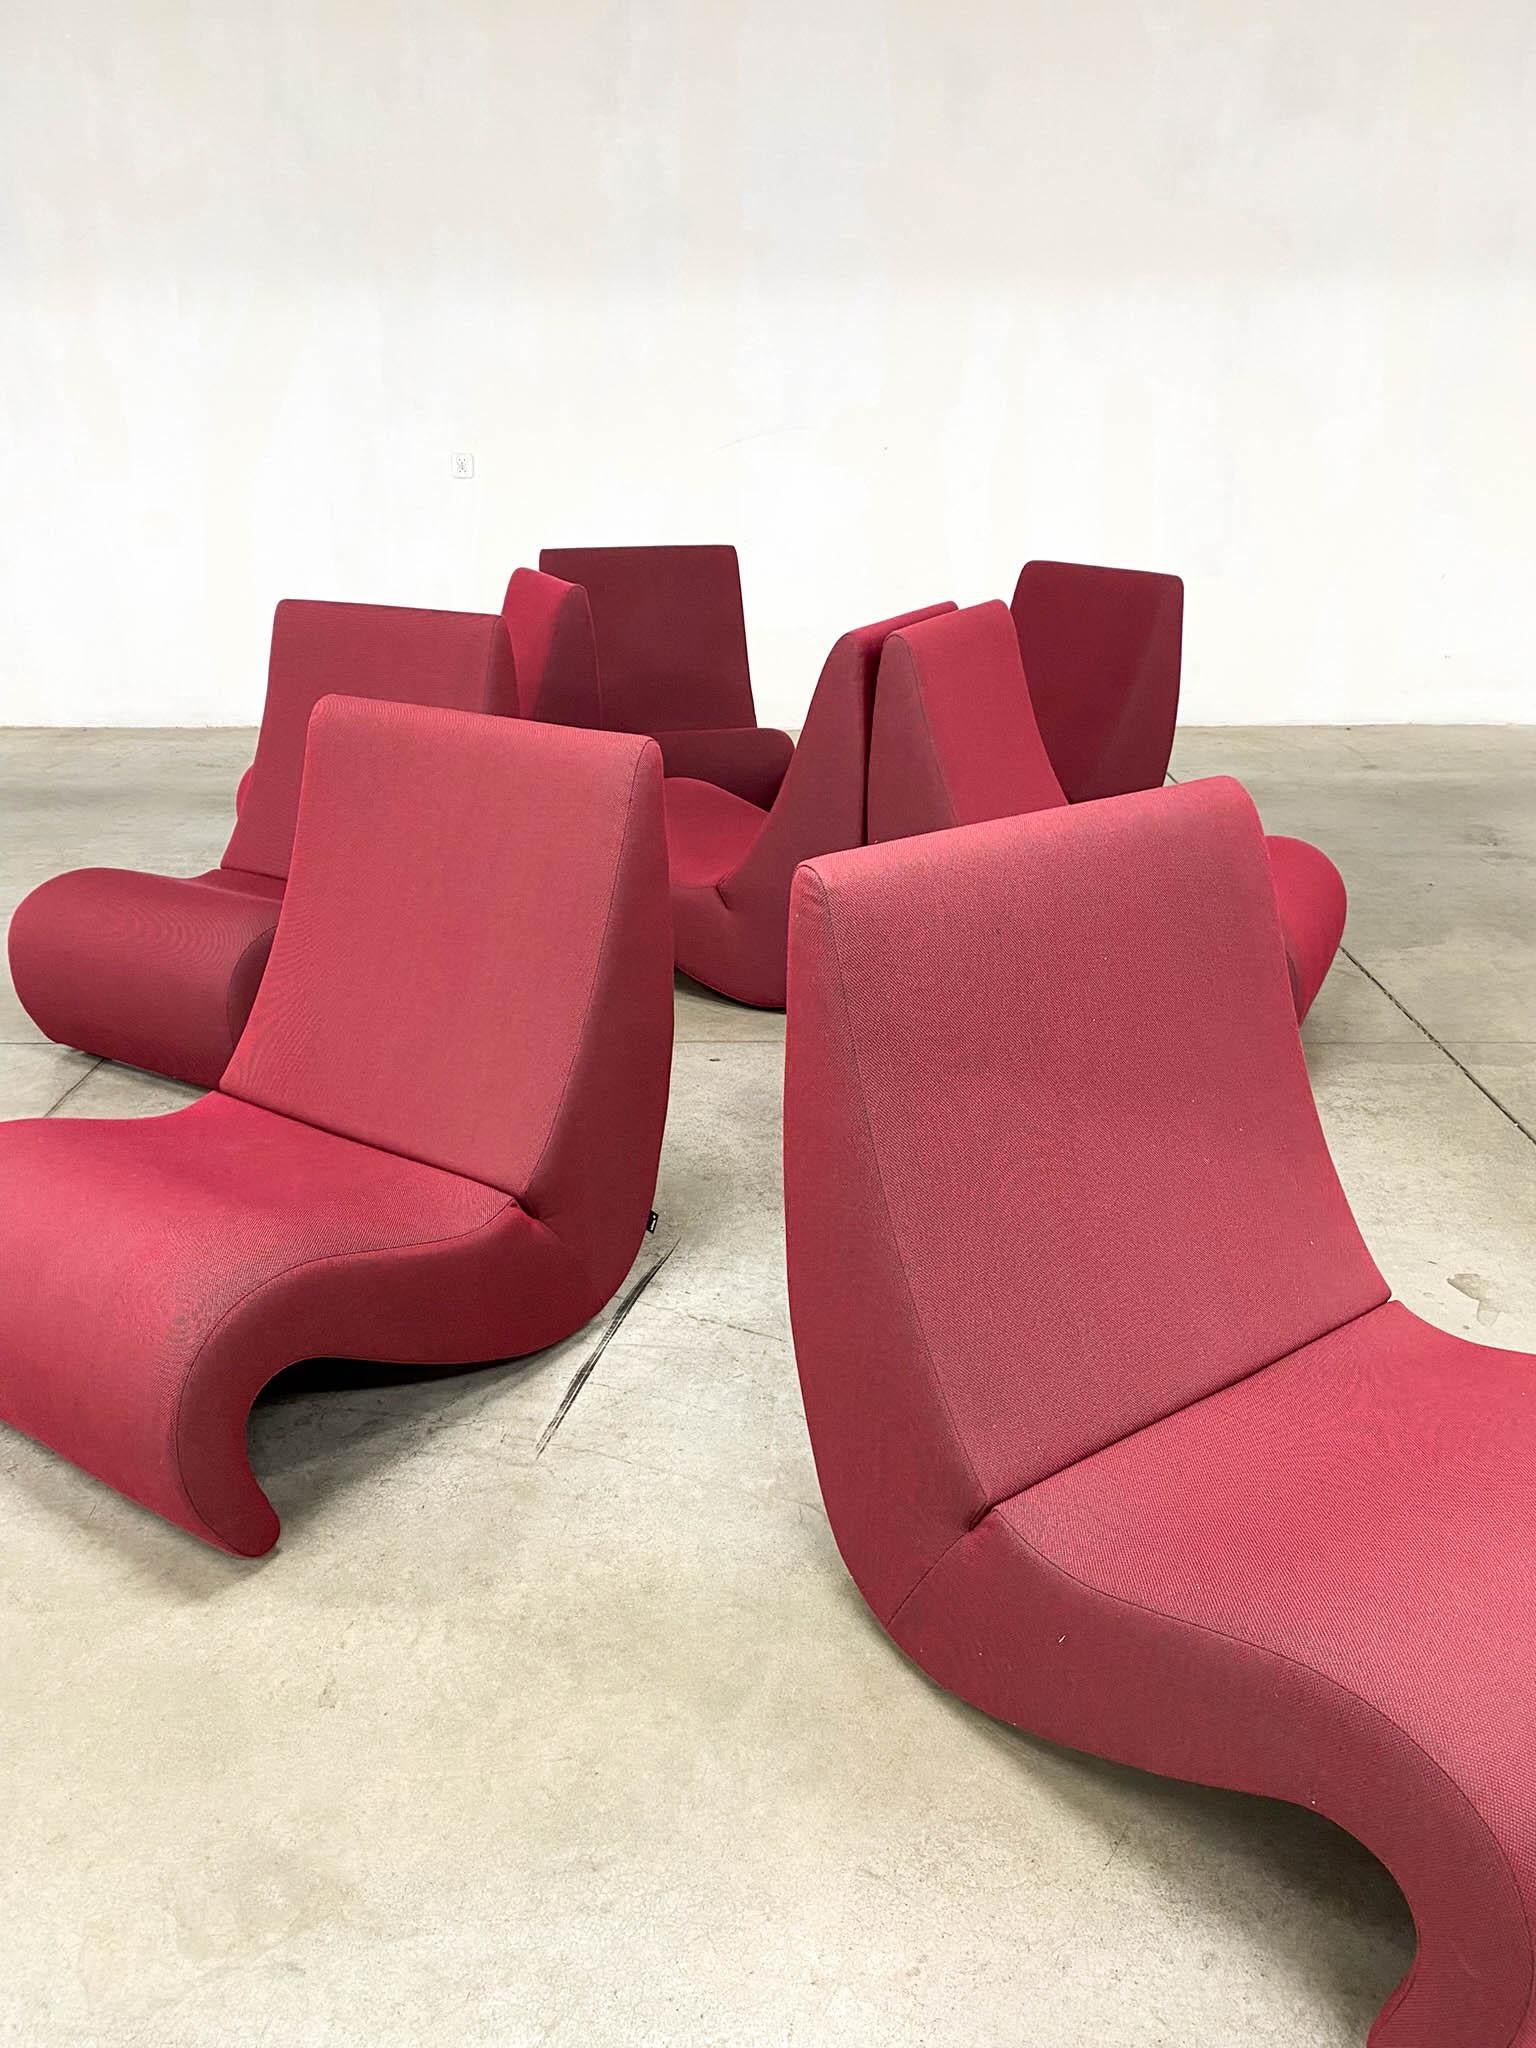 Amoebe Lounge Chair by Verner Panton for Vitra, 2000s For Sale 1